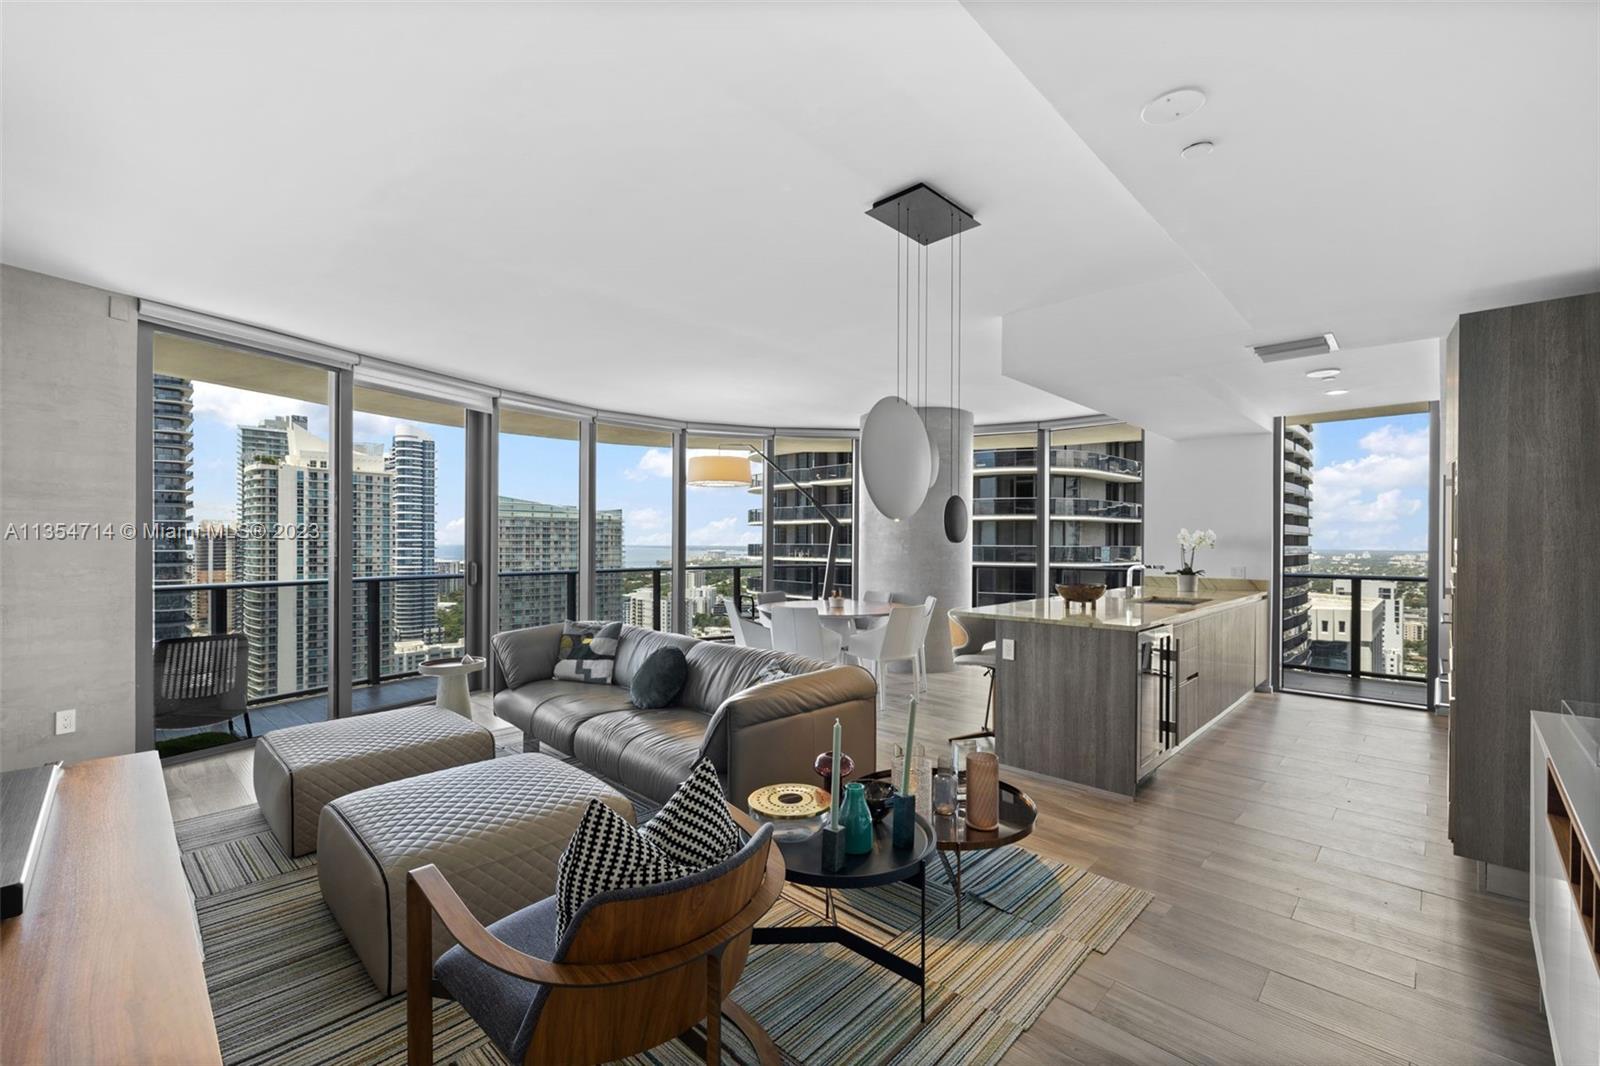 Corner Residence at the New SLS Lux in Brickell. Offered Turnkey, including all furniture & accessories. A private elevator opens to this 3B/4B + Den unit offering spacious open living areas w/floor to-ceiling windows that lead to a wrap-around balcony to enjoy fantastic city views & partial bay views. Unique custom paint throughout & wholly furnished. Electronic Shades in all rooms. 1 Reserved Parking Space. 

The natural light offers dramatic sunrise-to-sunset views of Biscayne Bay & the city lights of the Brickell skyline. Each spacious bedroom features a relaxing en-suite bathroom with plenty of closet and storage space. 

World Class amenities; 2 resort pools, Fitness Center & Spa, Concierge Service, Billiard & Wine rooms, Tennis & Basketball. 

Tenant until May 31/2023